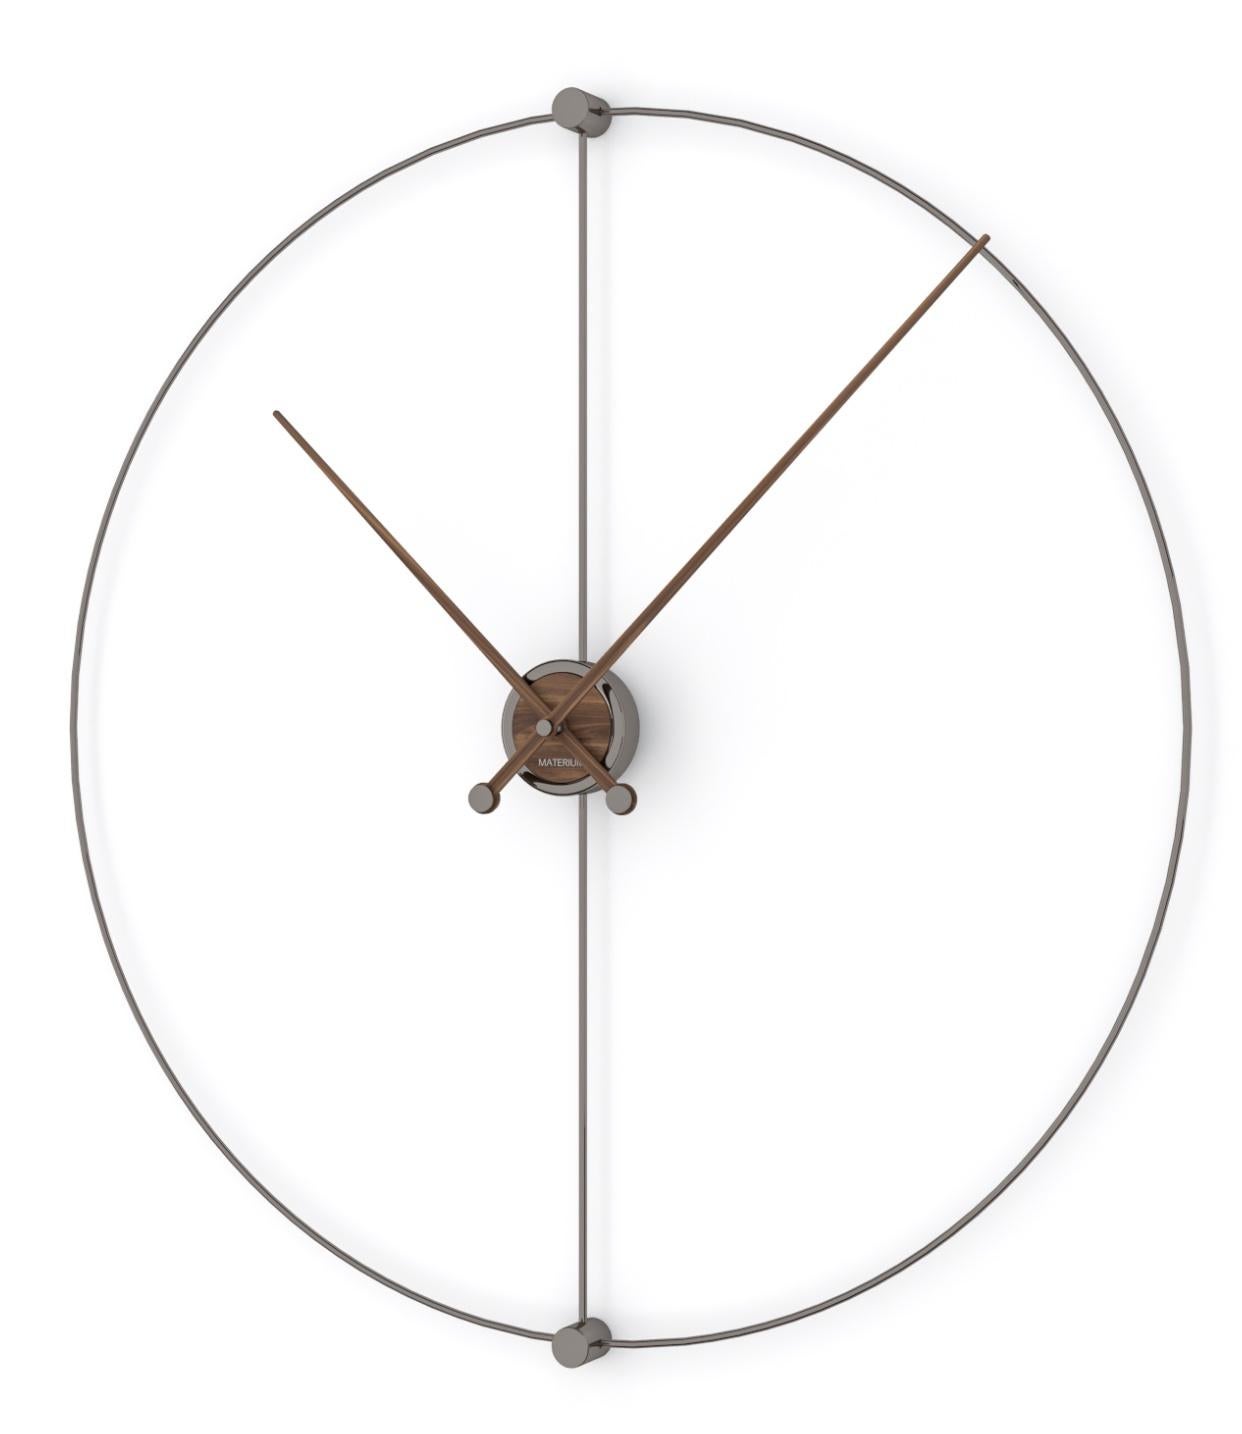 Metals and precious woods give life to a large clock inspired by the perfection of mathematics. The circumference of Euclidean, divided by its diameter, is emphasized by long and contrasting hands, as if to mark a geometric calculation.

All of